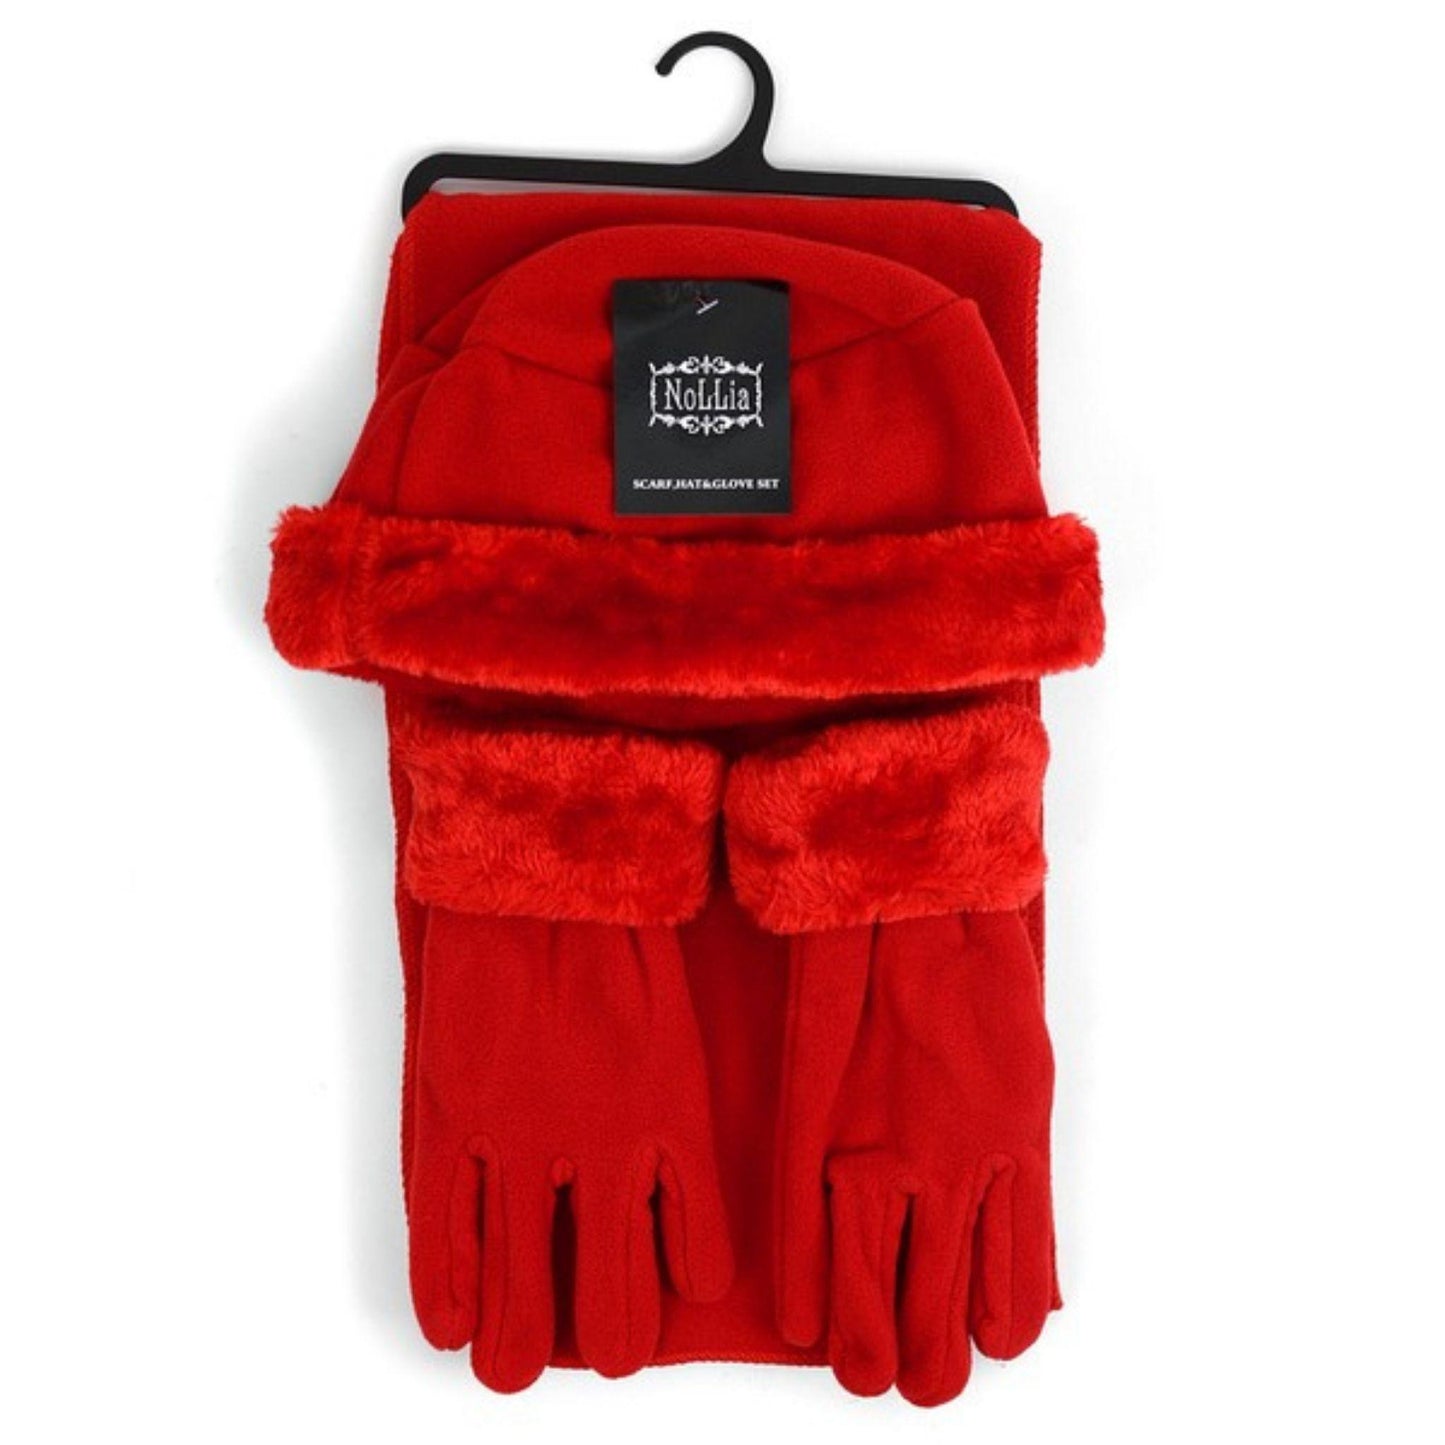 Red hat, glove, and scarf set